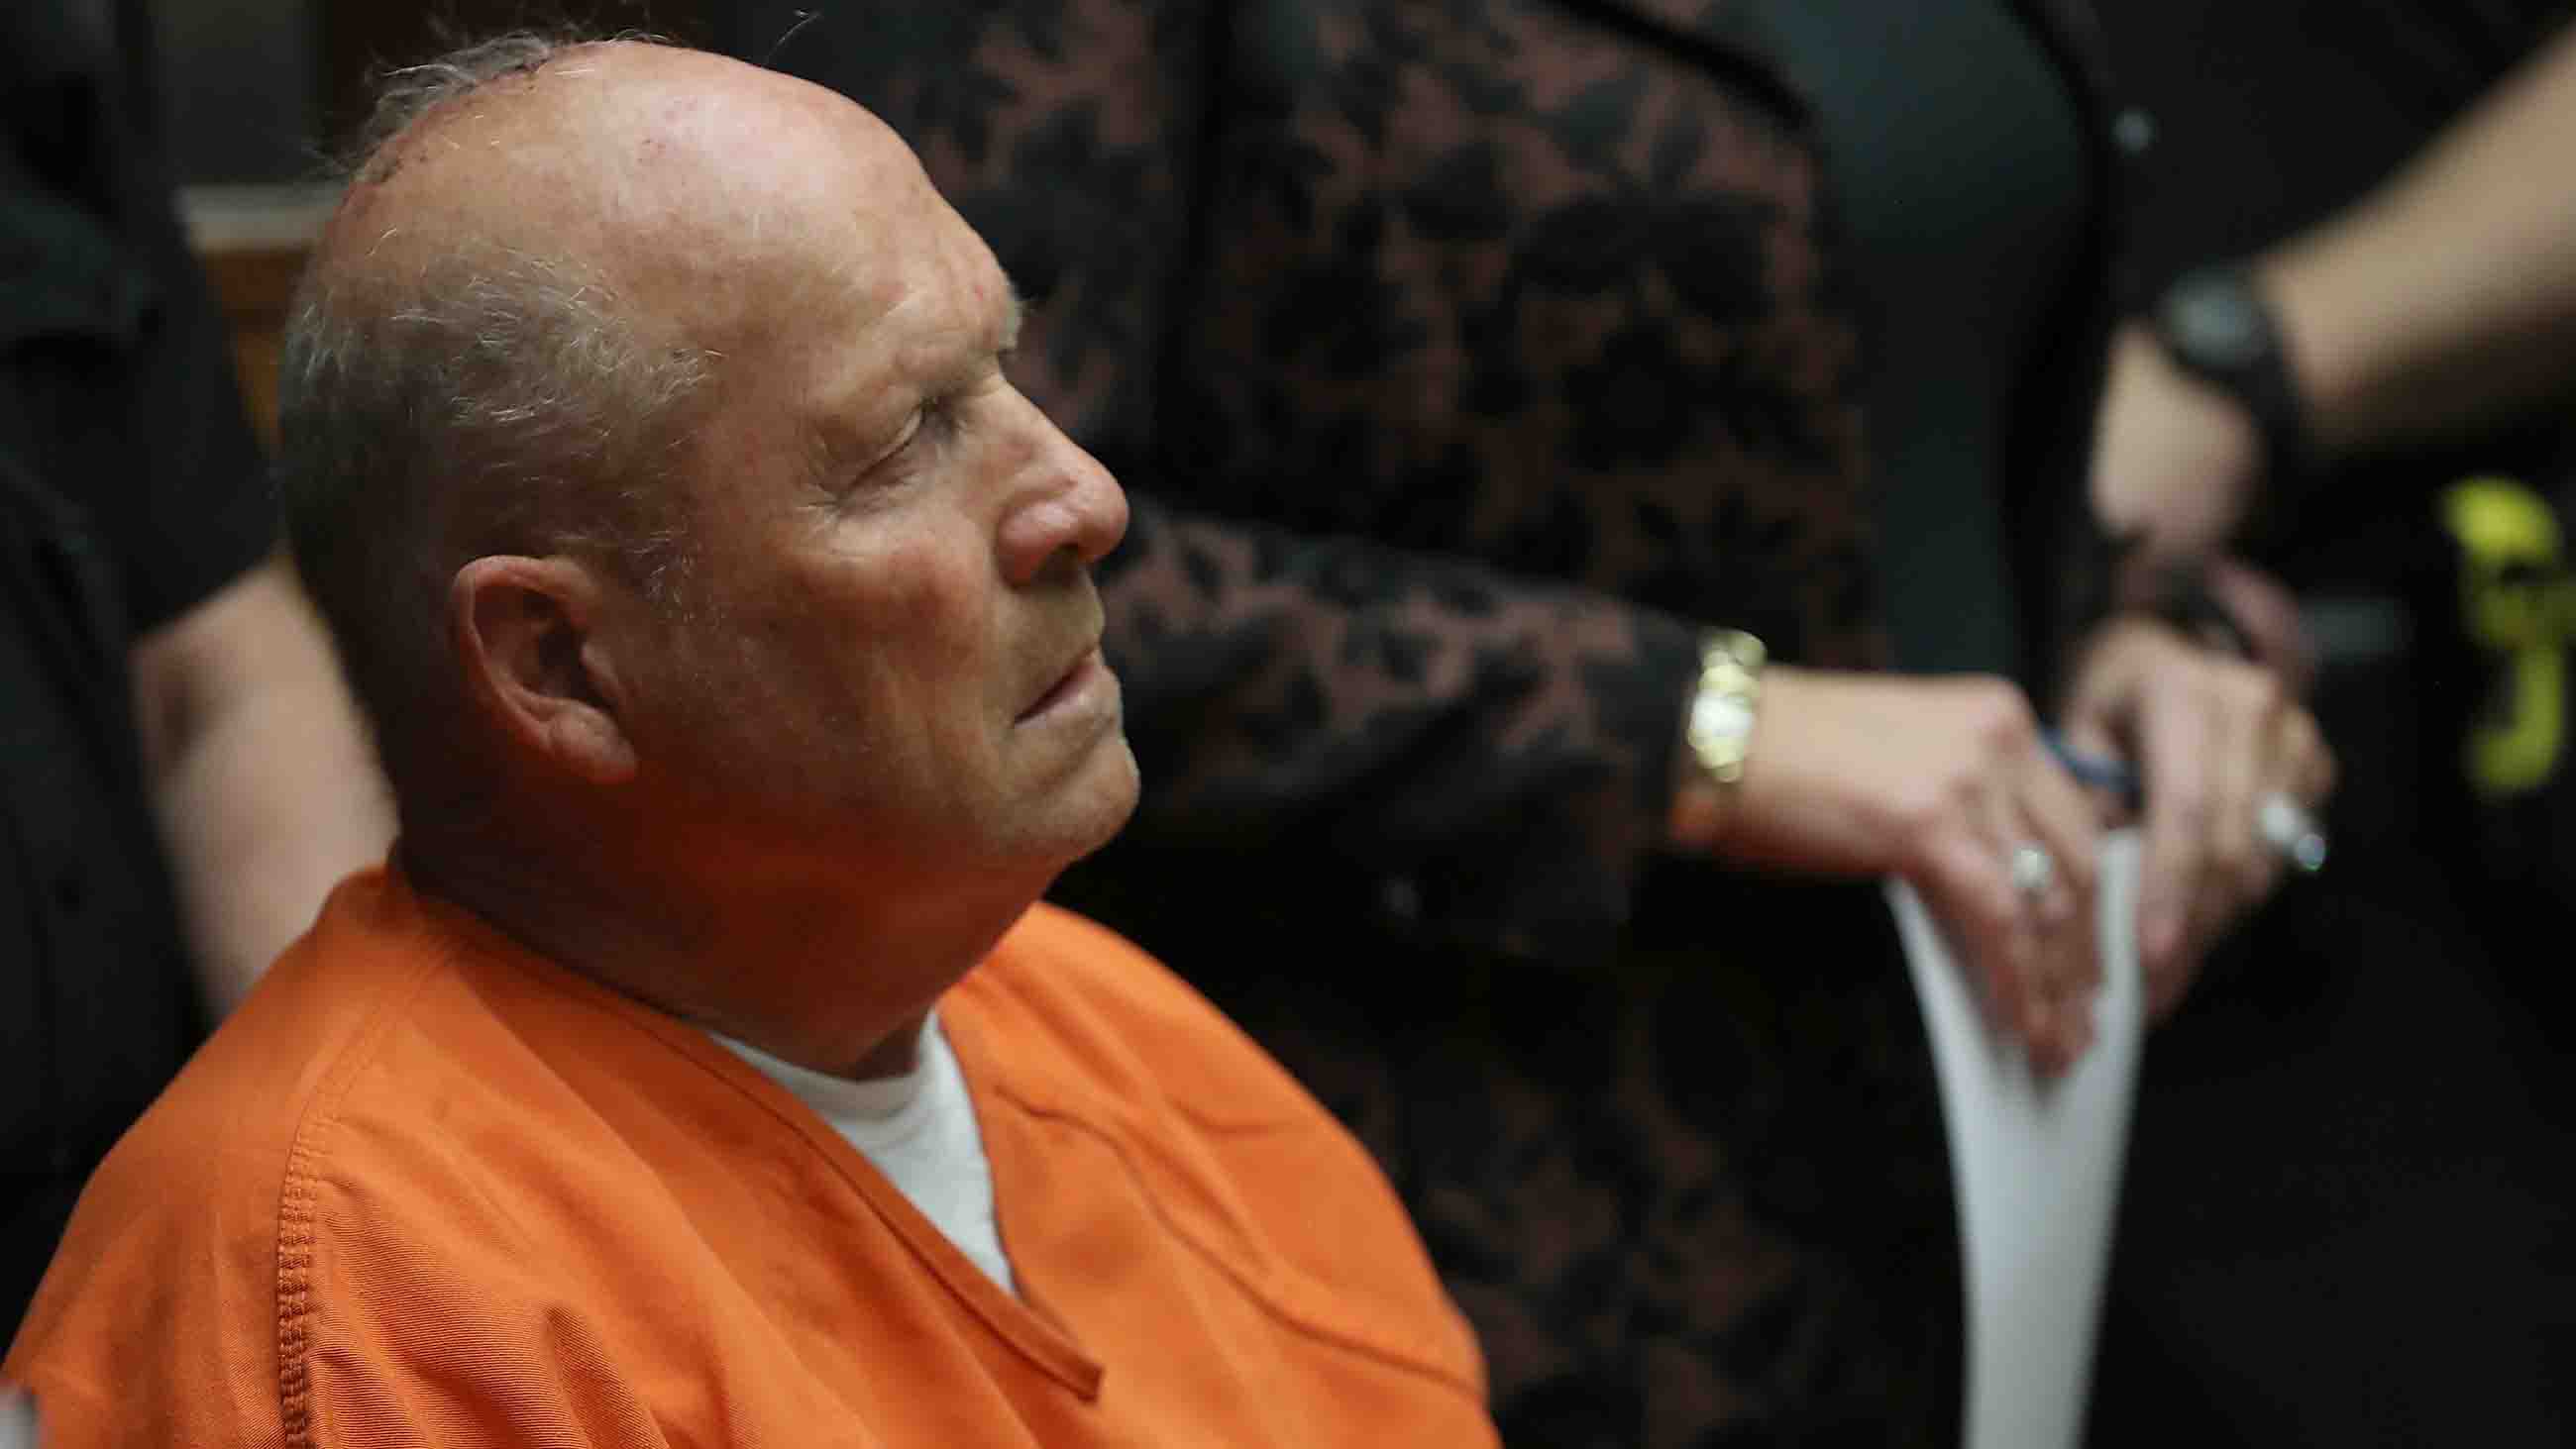 Joseph James DeAngelo, the suspected "Golden State Killer," appears in court for his arraignment on April 27, 2018 in Sacramento, California.